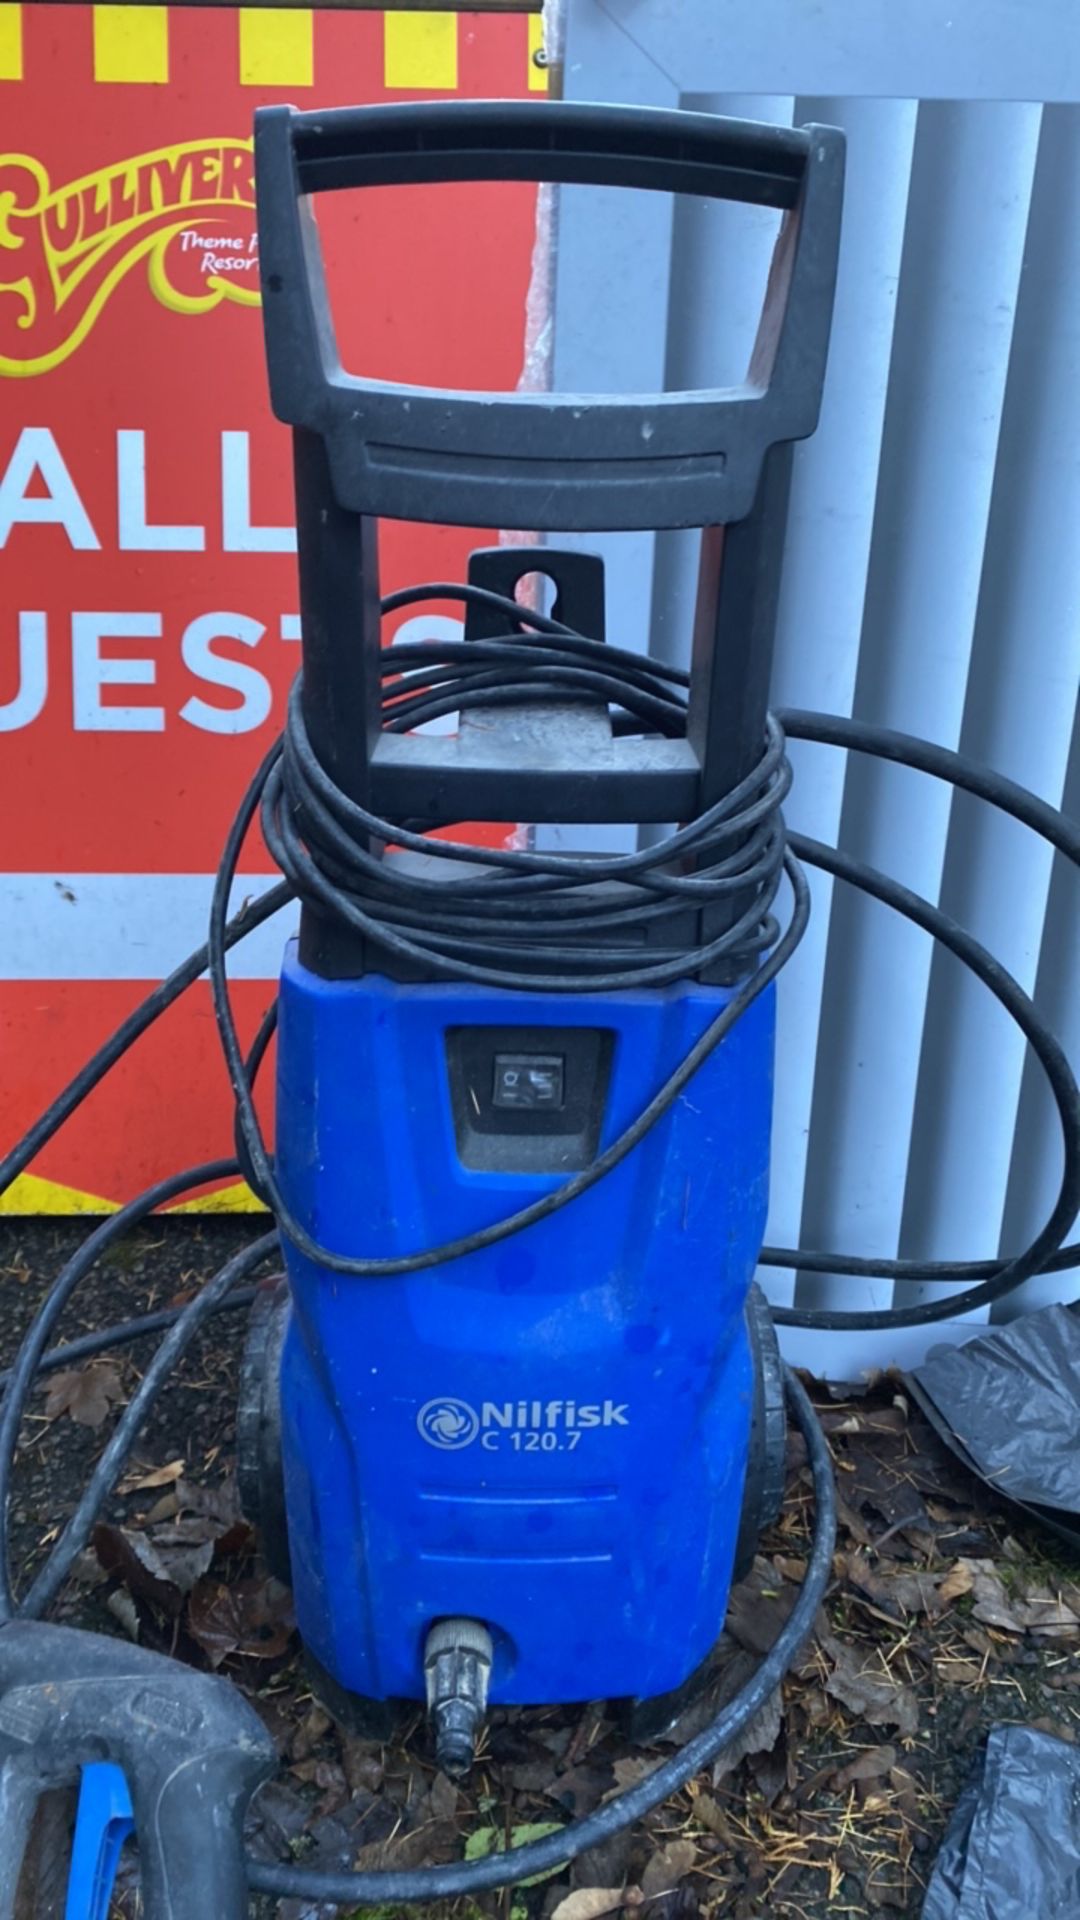 Nikfisk C120.7 Power washer - Image 2 of 4